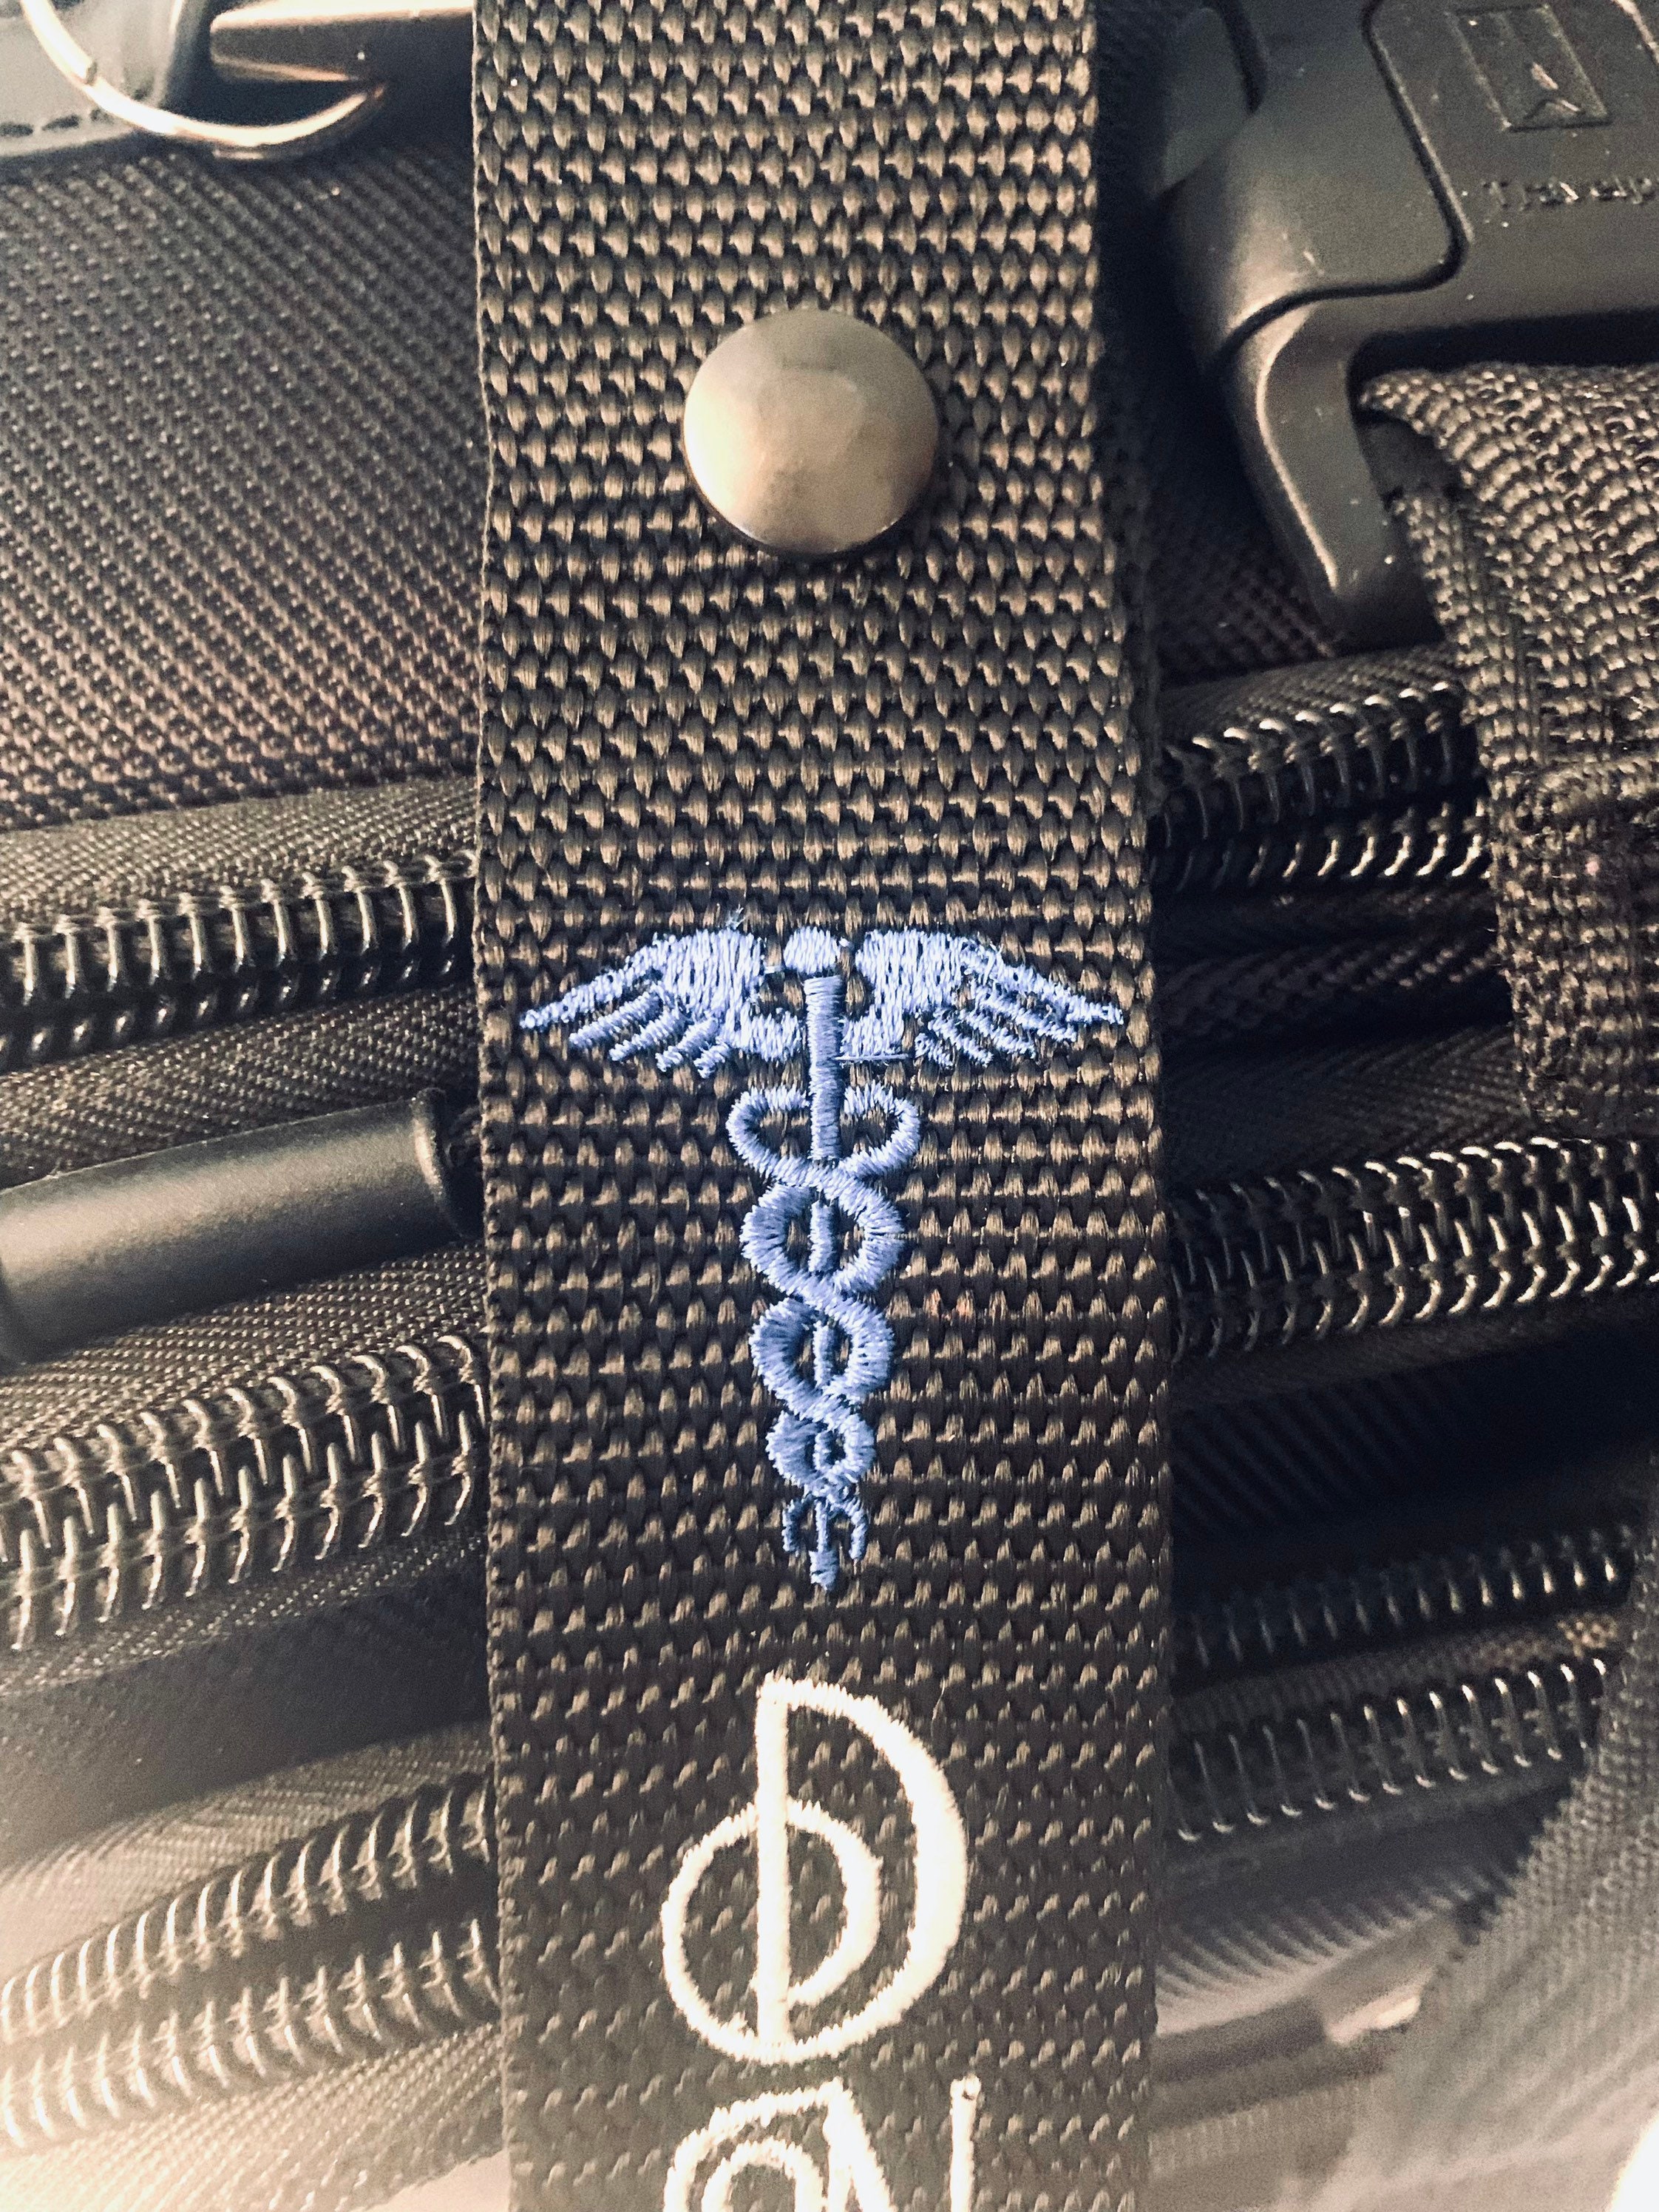 Tassen & portemonnees Bagage & Reizen Bagageriemen Personalized  Embroidered Nurse caduceus  Luggage or Bag Tag with Initials!New Strap Colors! 